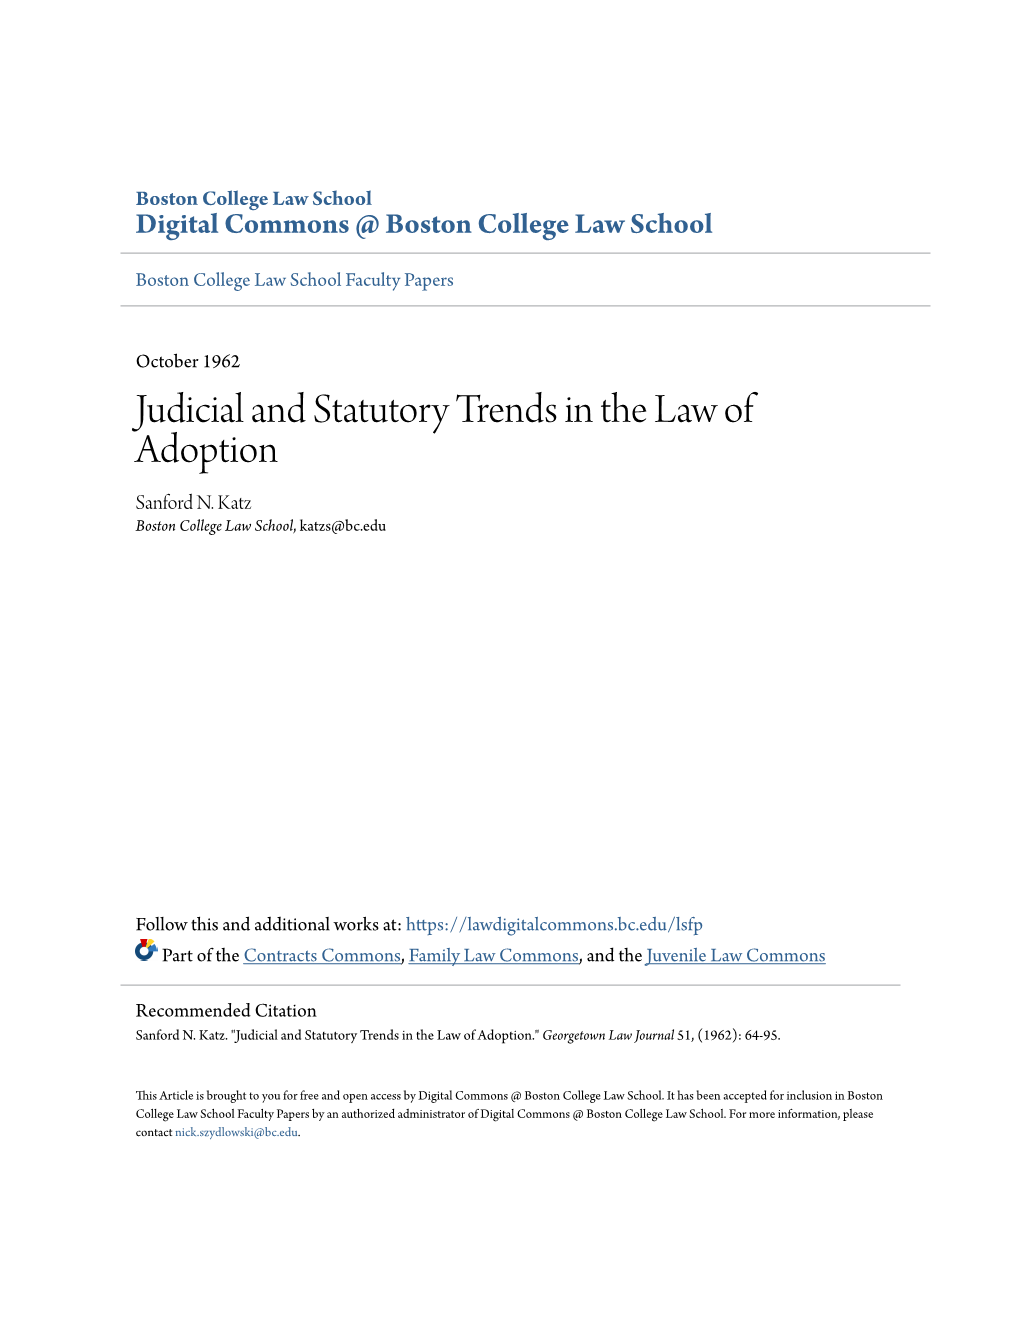 Judicial and Statutory Trends in the Law of Adoption Sanford N